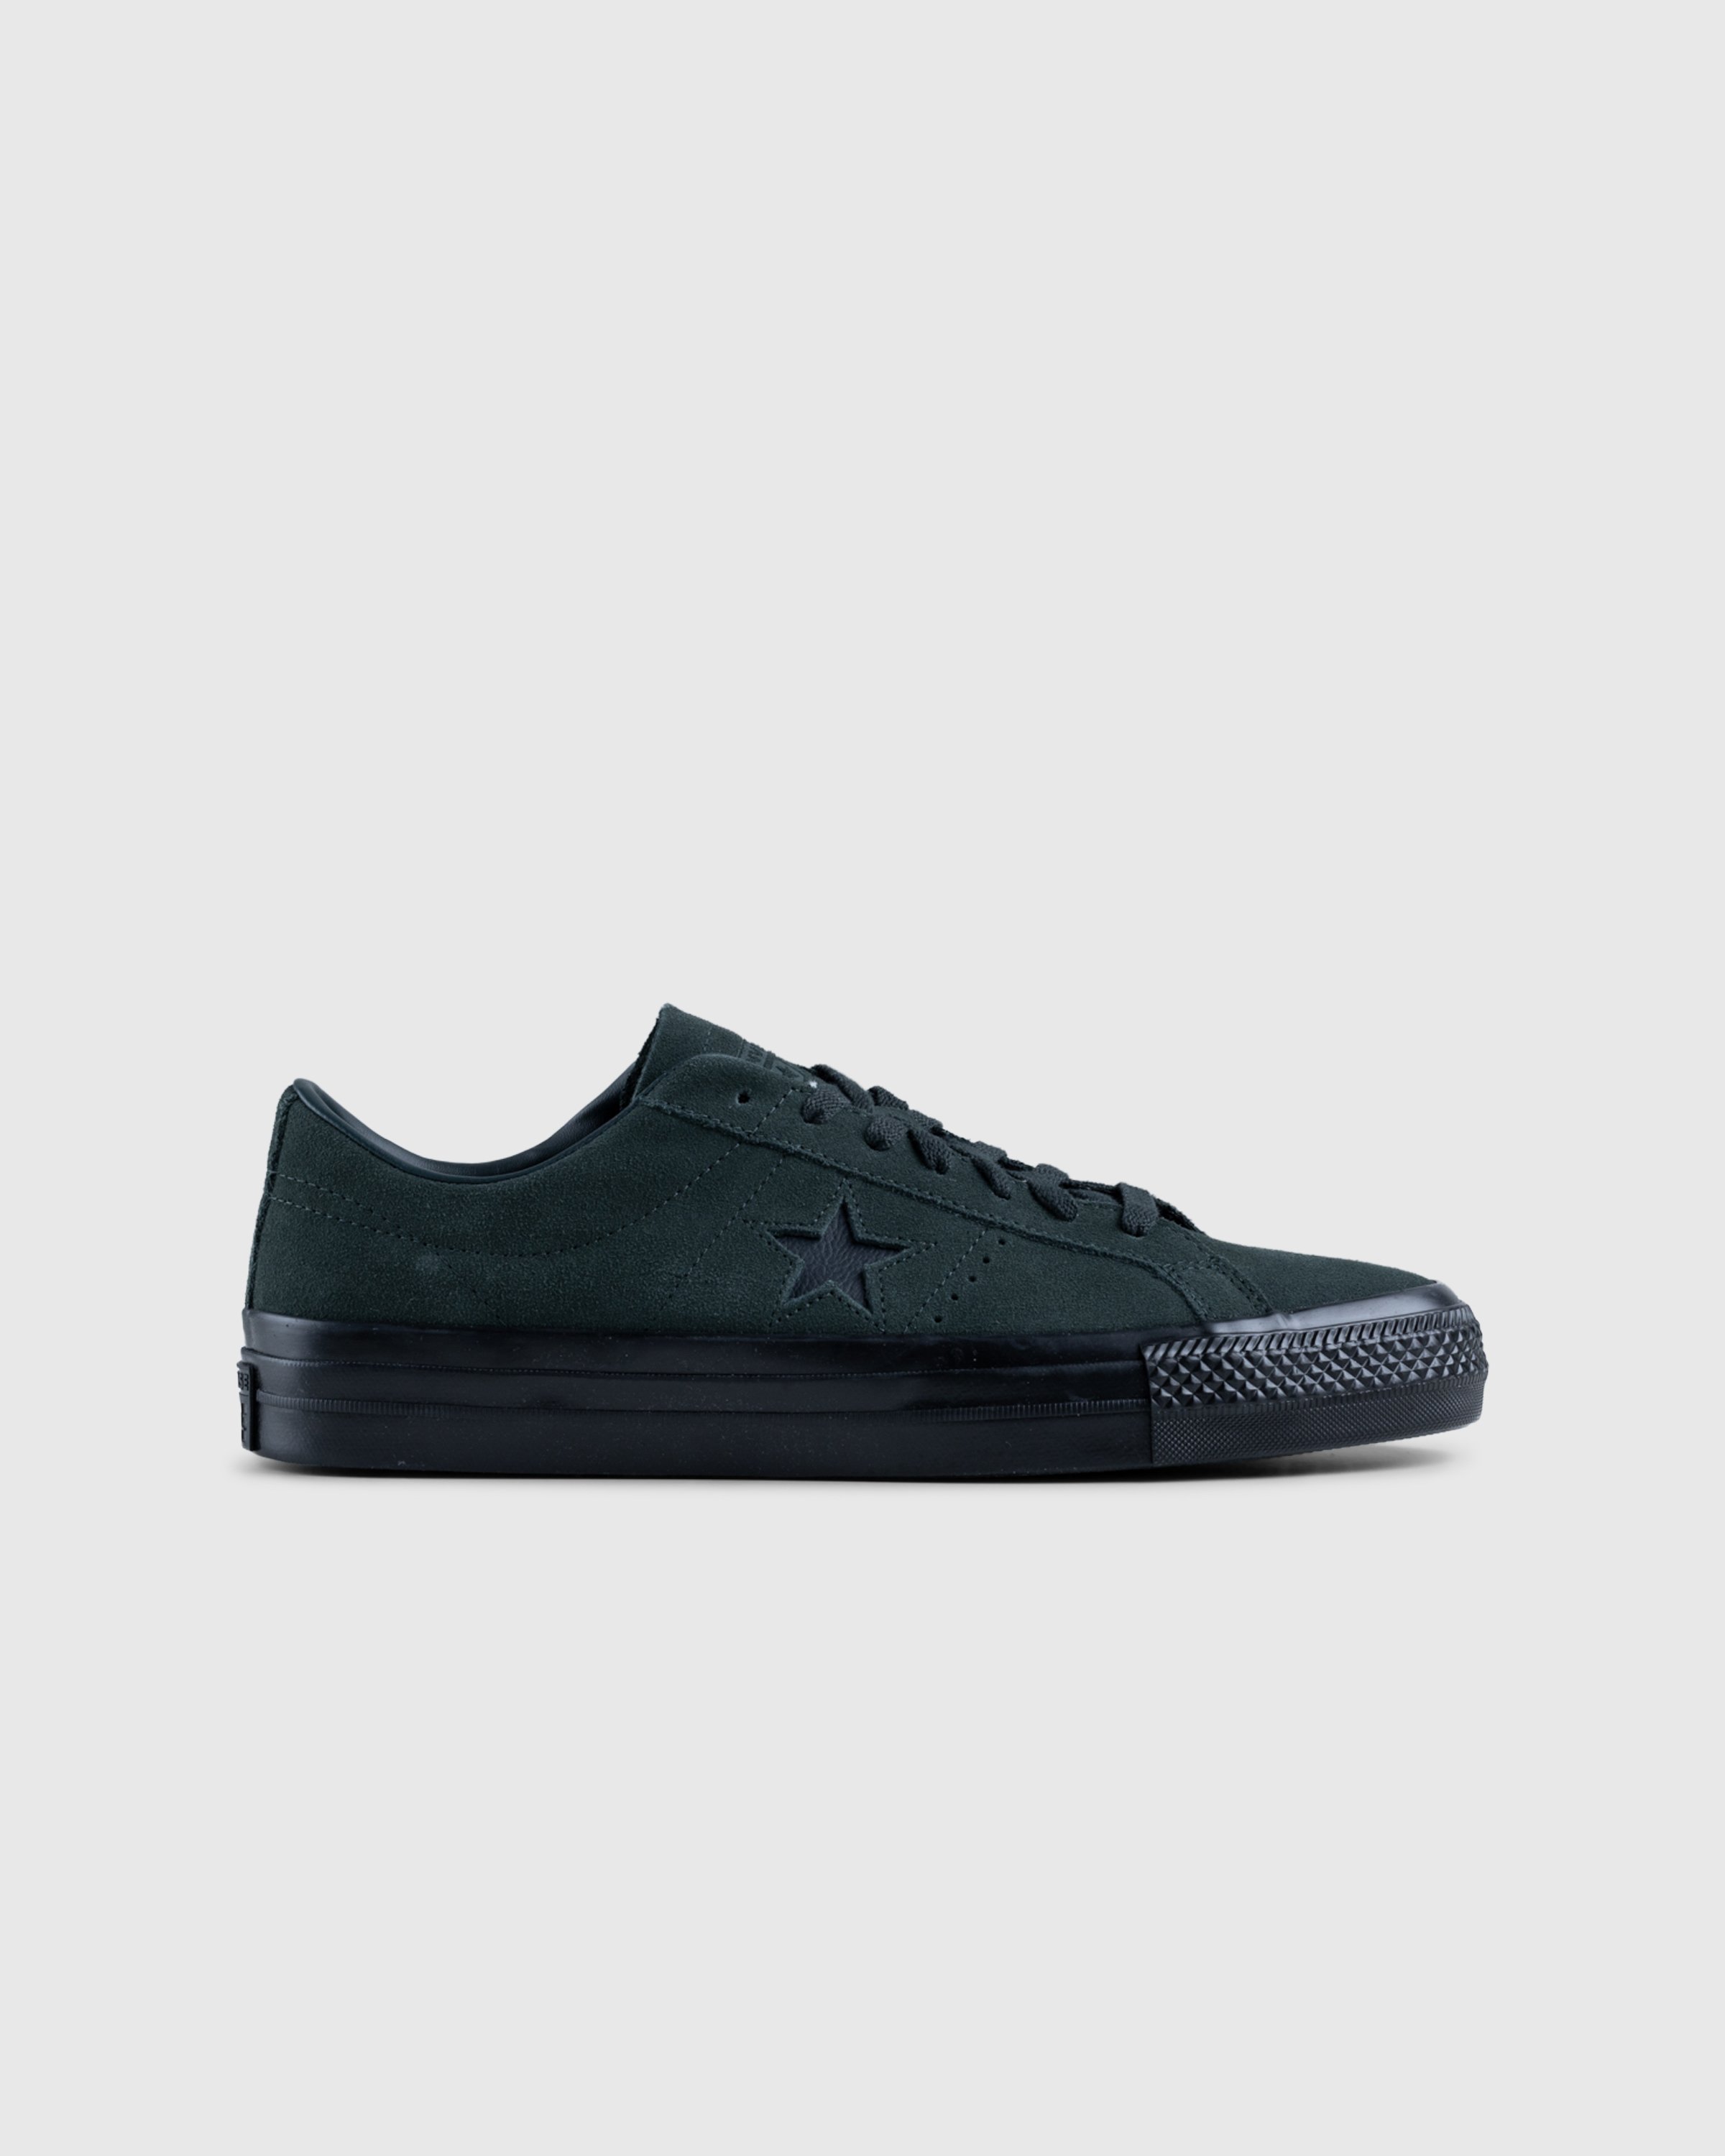 Converse - ONE STAR PRO OX SECRET PINES/BLACK/BLACK - Low Top Sneakers - undefined - Image 1